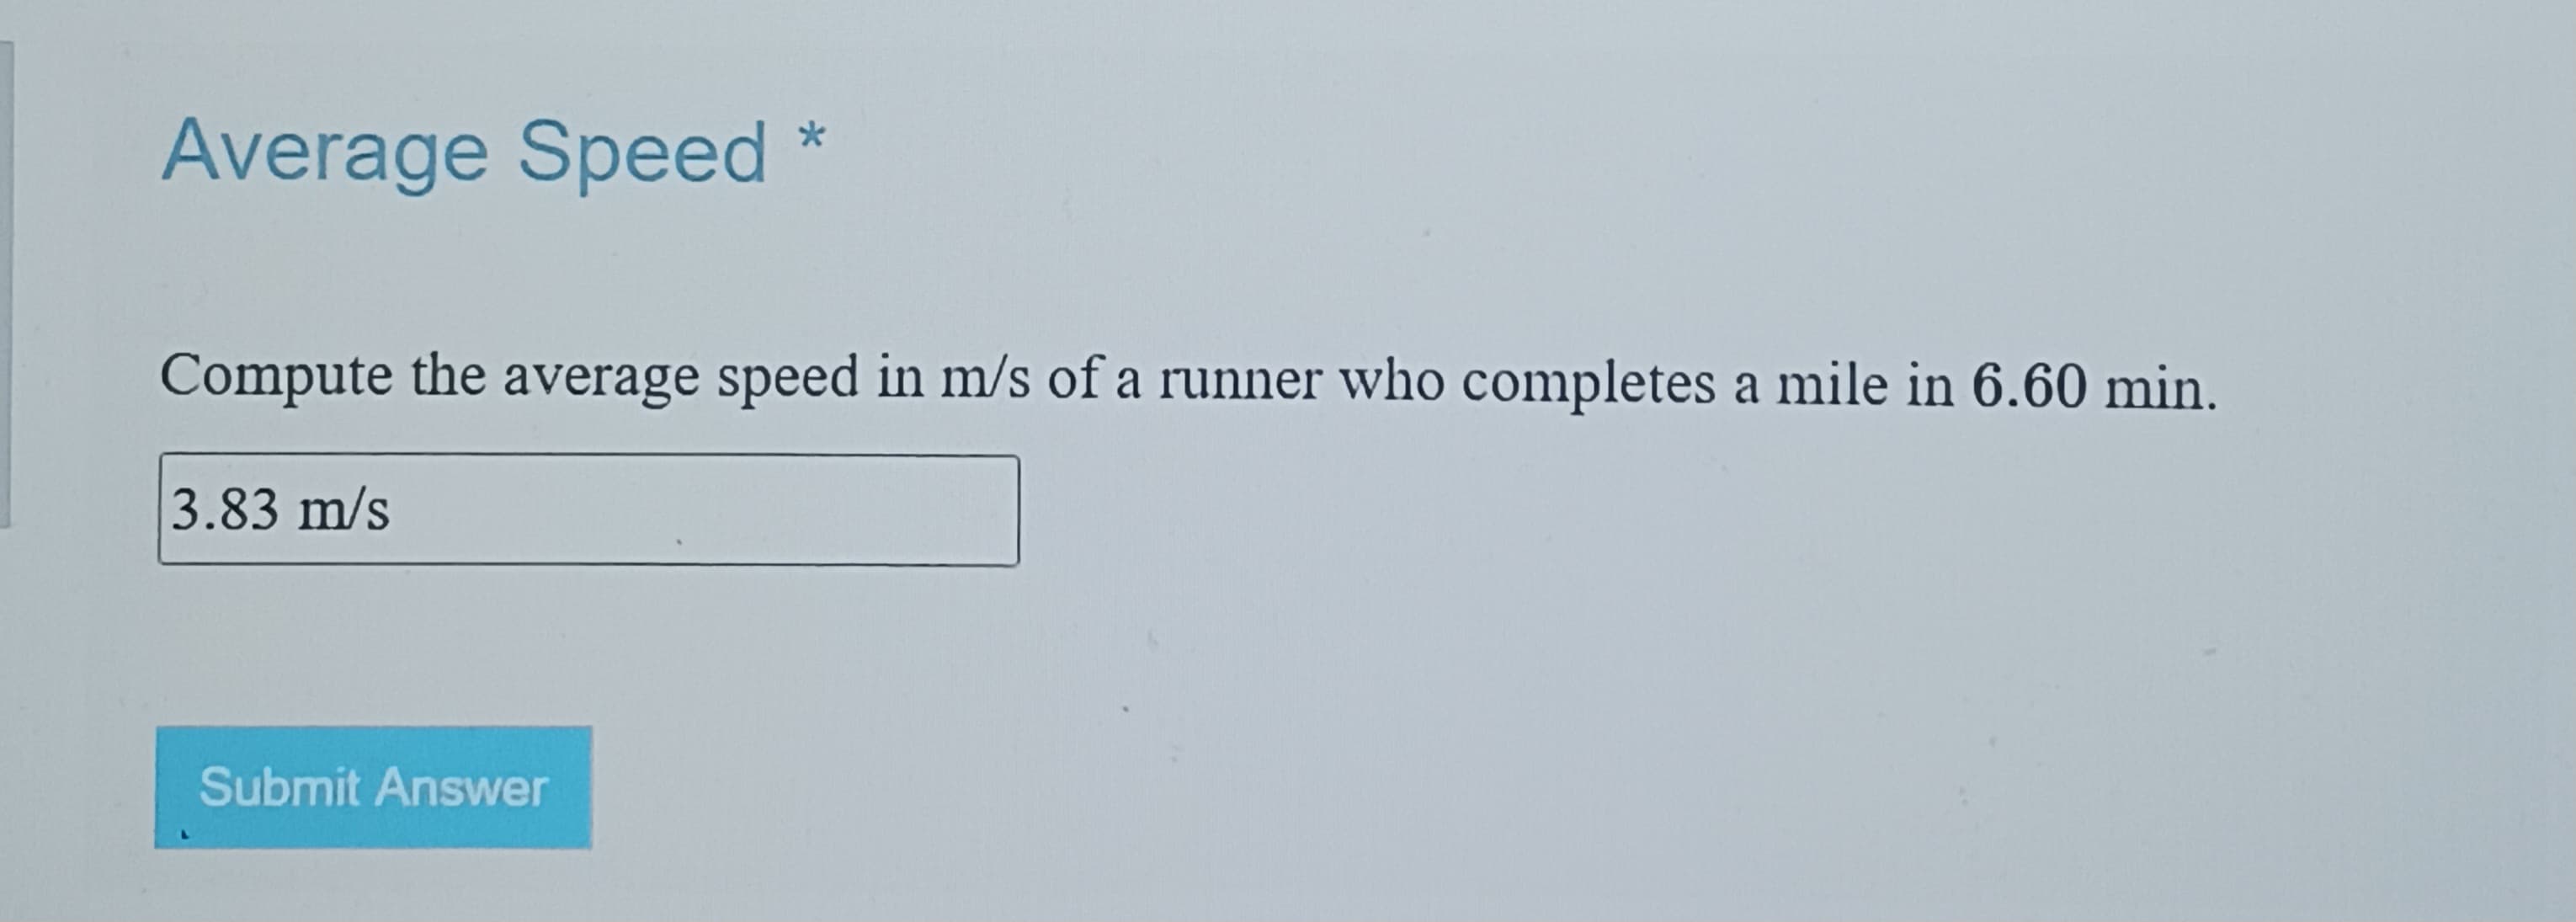 Average Speed *
Compute the average speed in m/s of a runner who completes a mile in 6.60 min.
3.83 m/s
Submit Answer